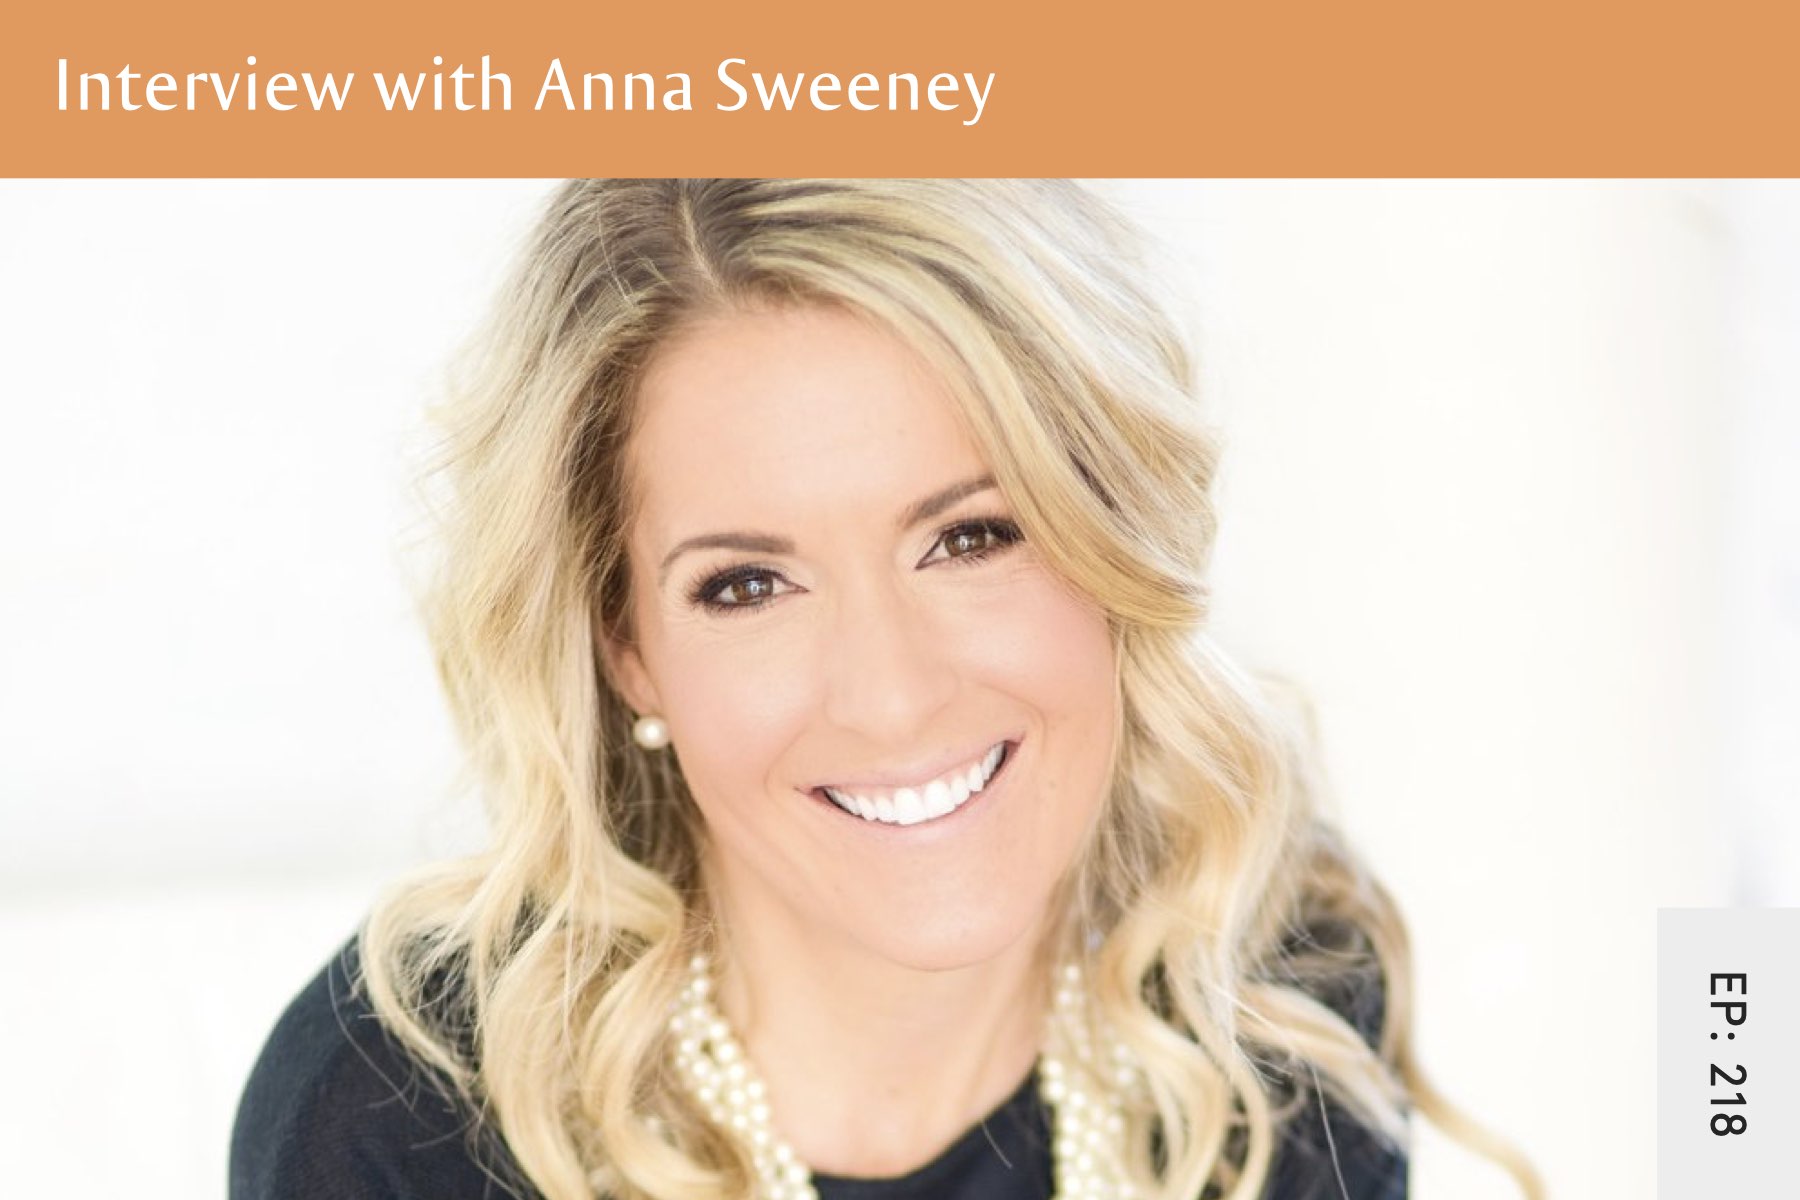 218: Living With A Chronic Illness, Disability and Body Acceptance with Anna Sweeney - Seven Health: Eating Disorder Recovery and Anti Diet Nutritionist